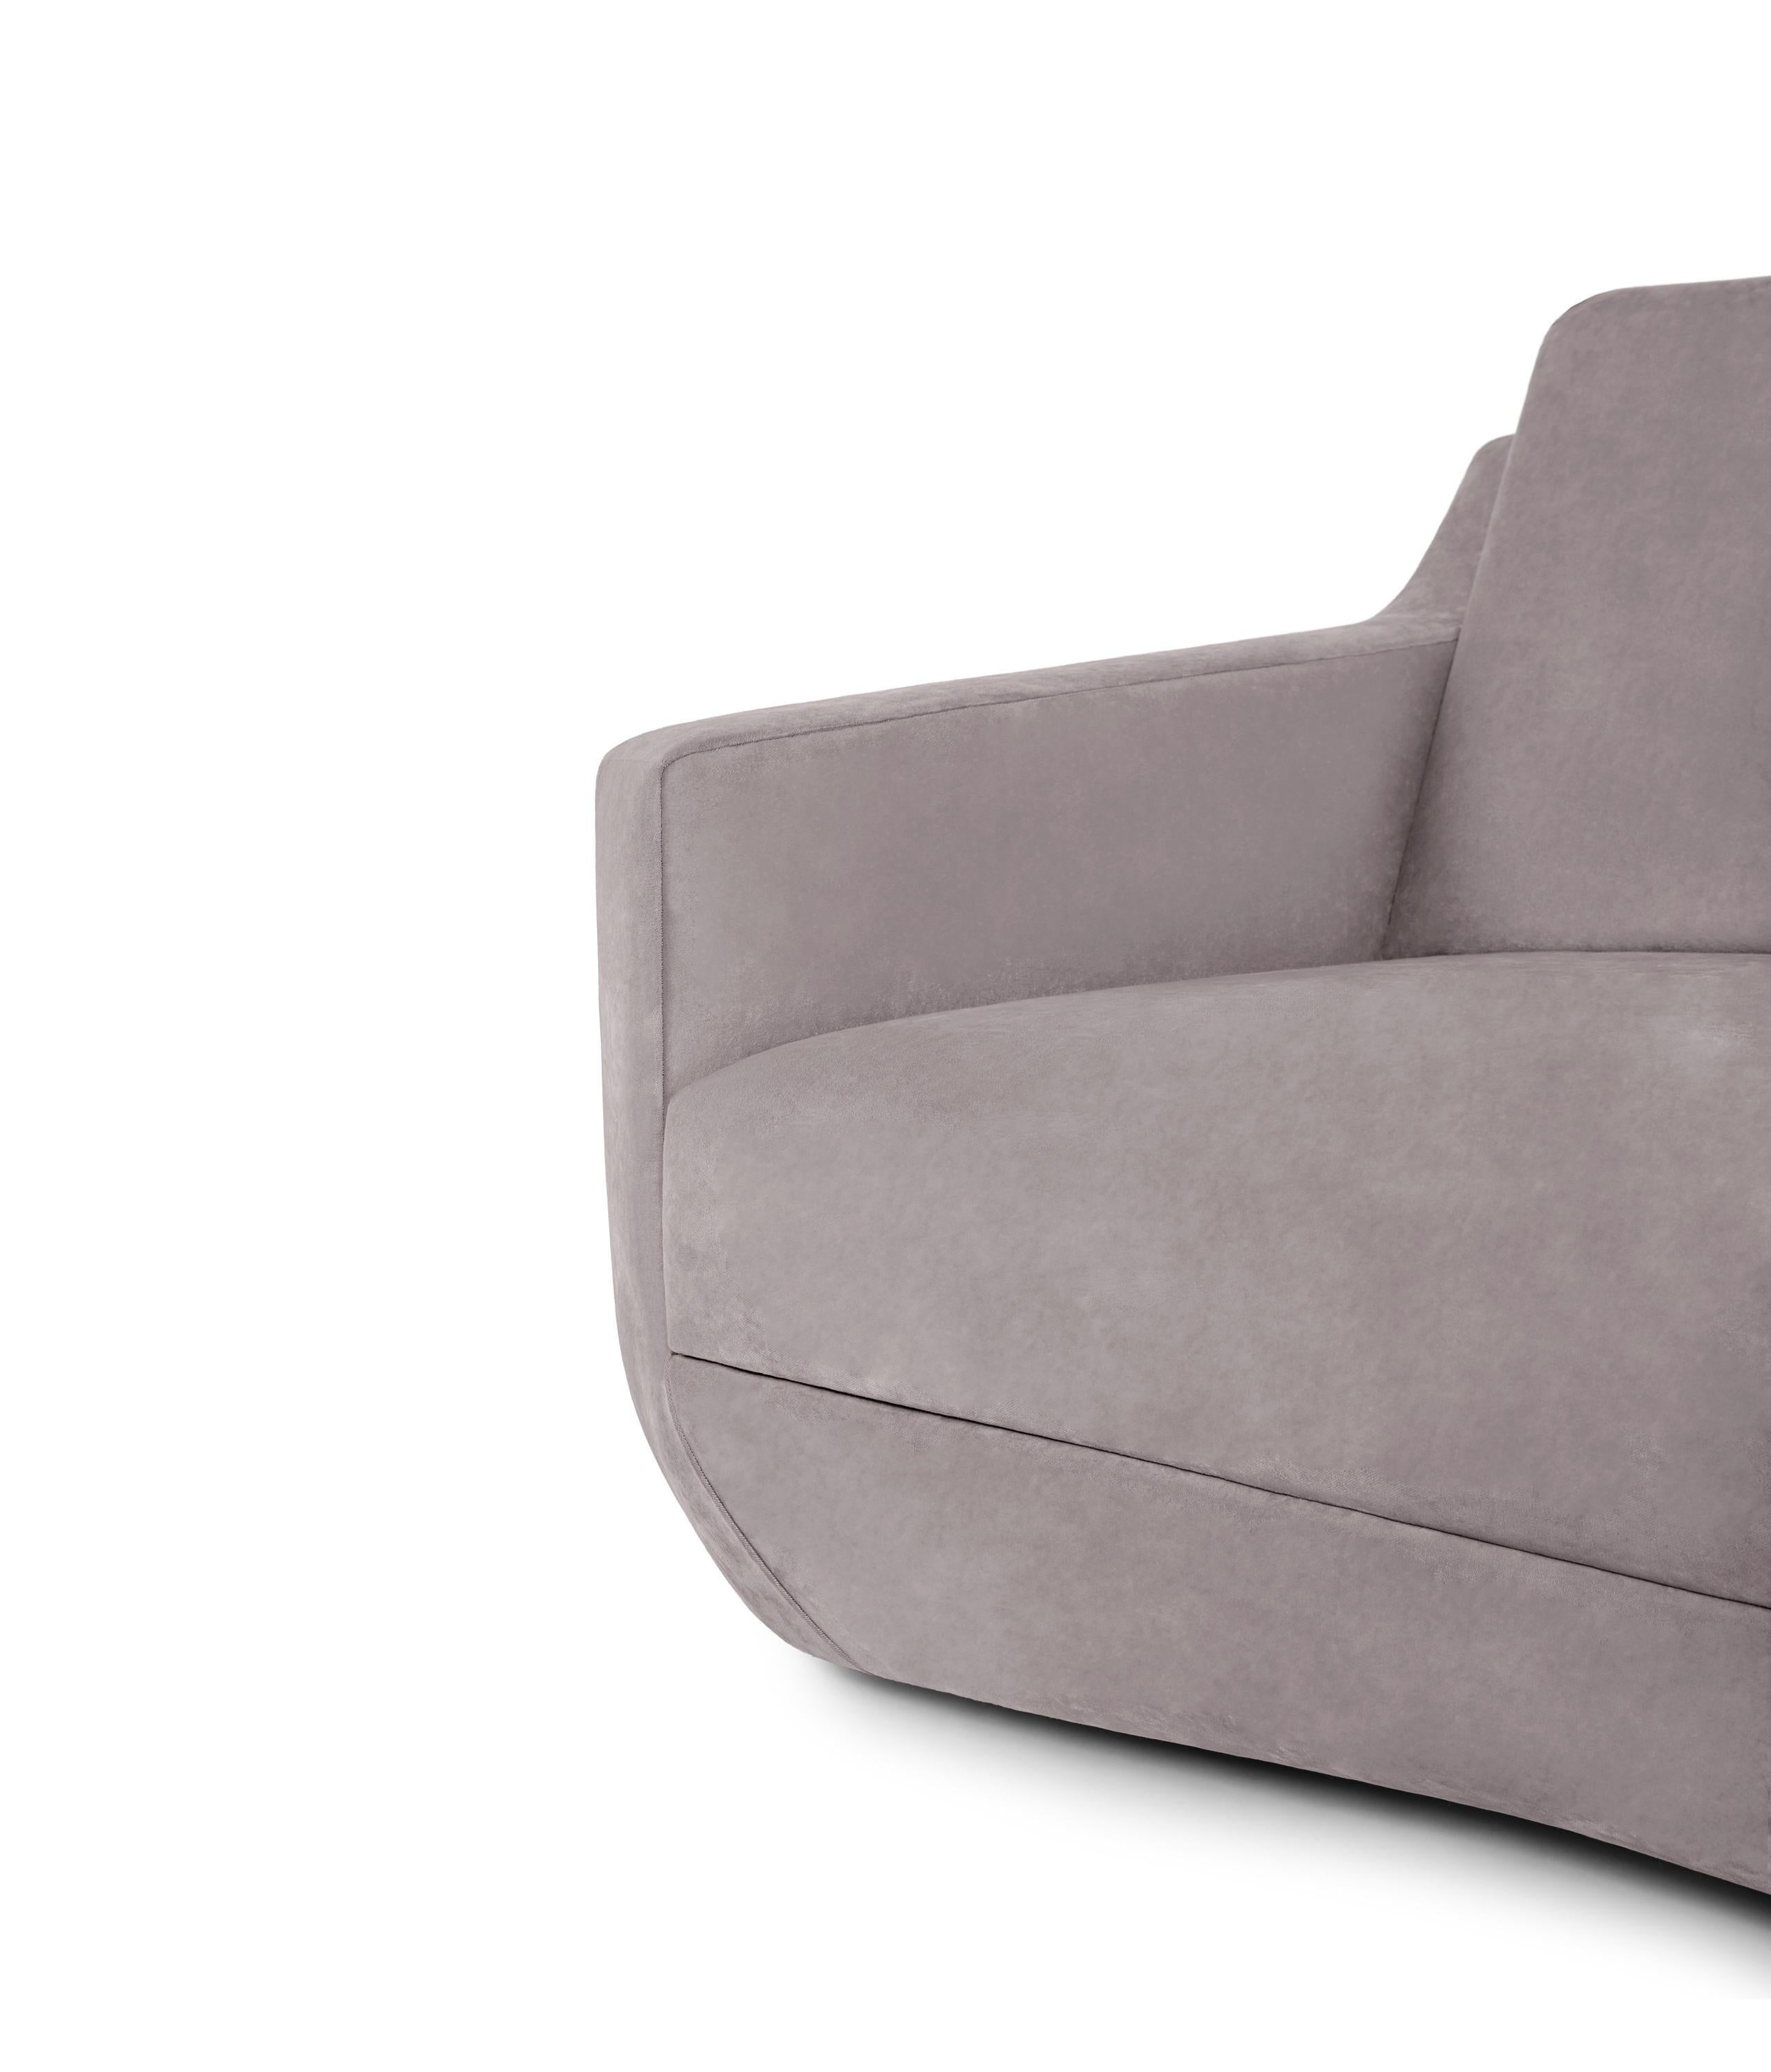 Contemporary Sculptural Sofa with Discreet Seaming For Sale 2